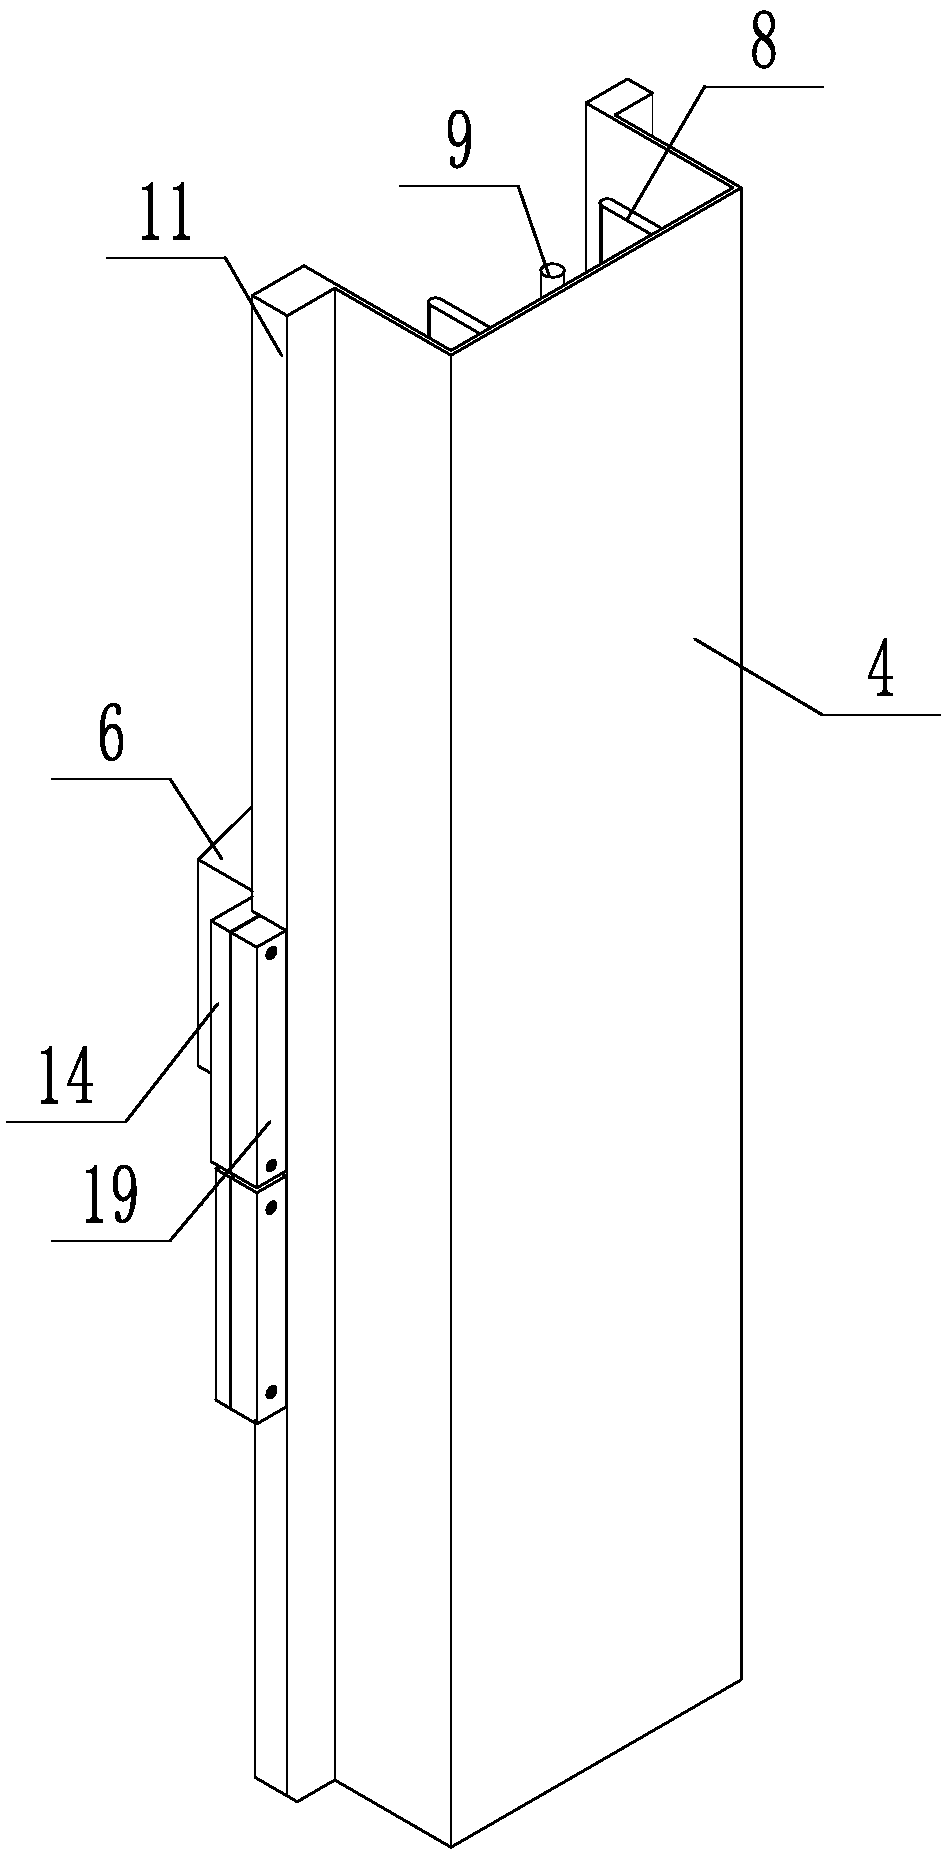 A server integrated delivery power cord tracing mechanism